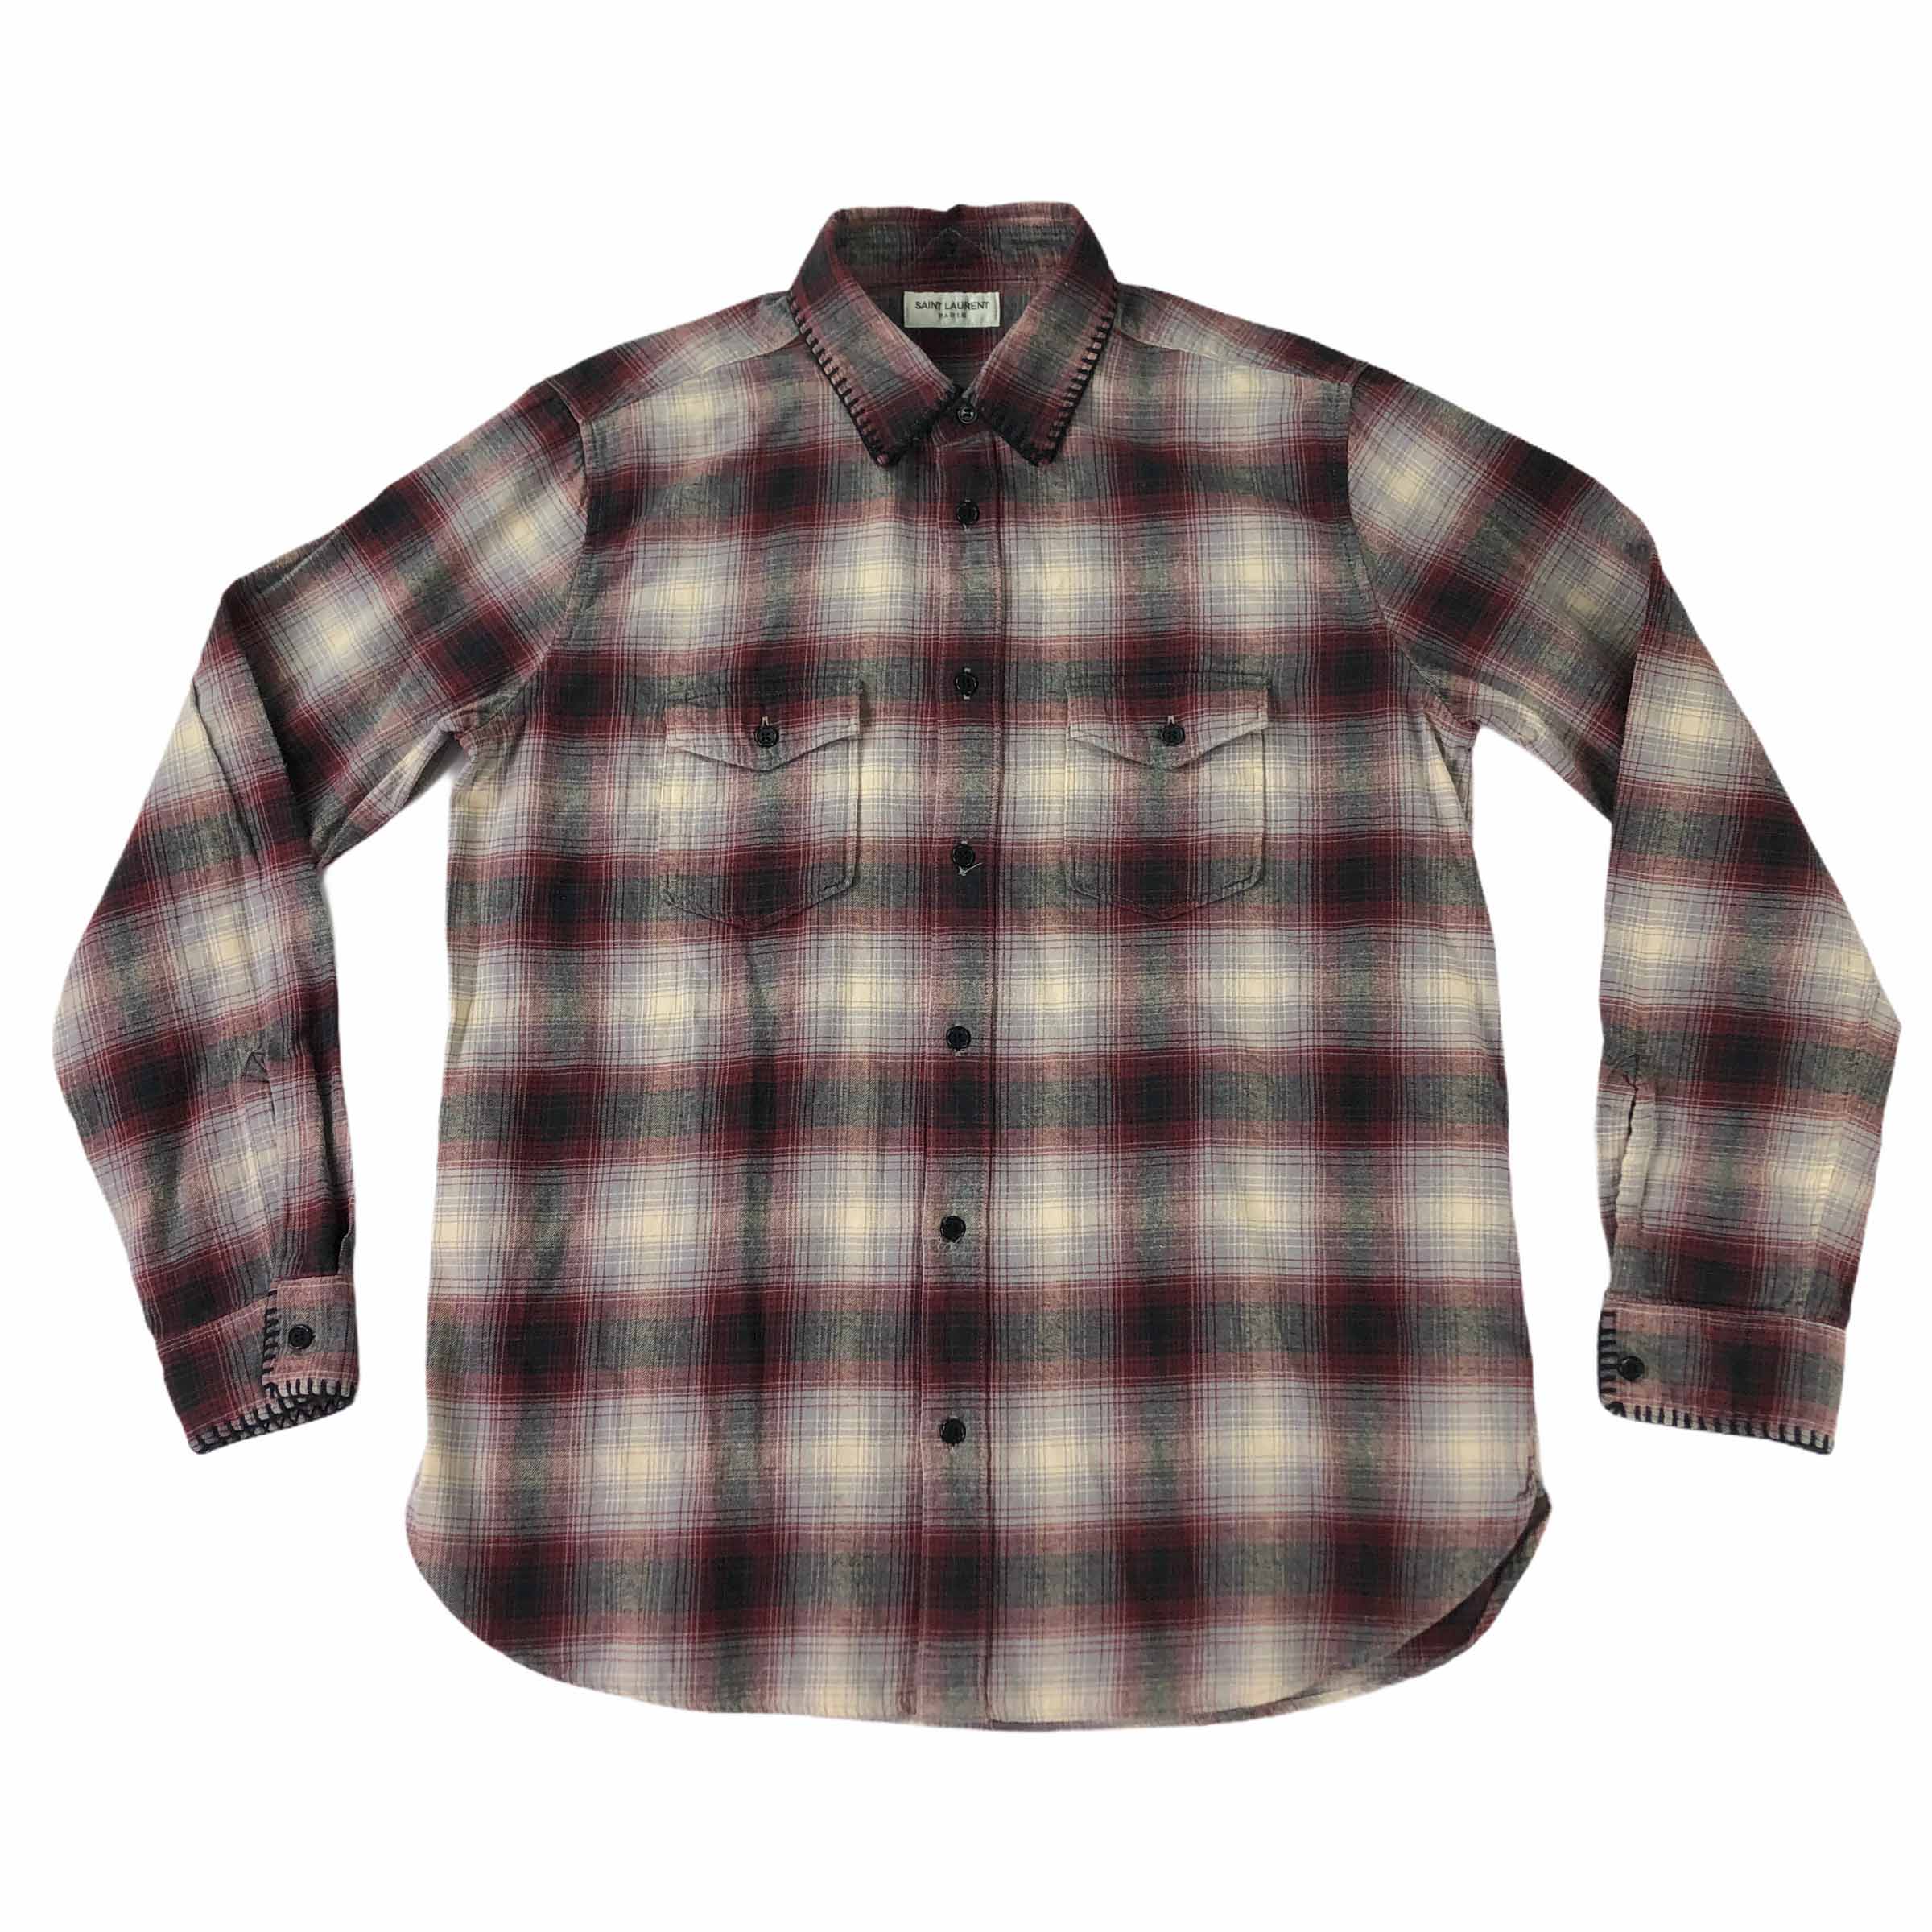 [Saint Laurent] Oversized Checked Shirt In Flannel - Size M